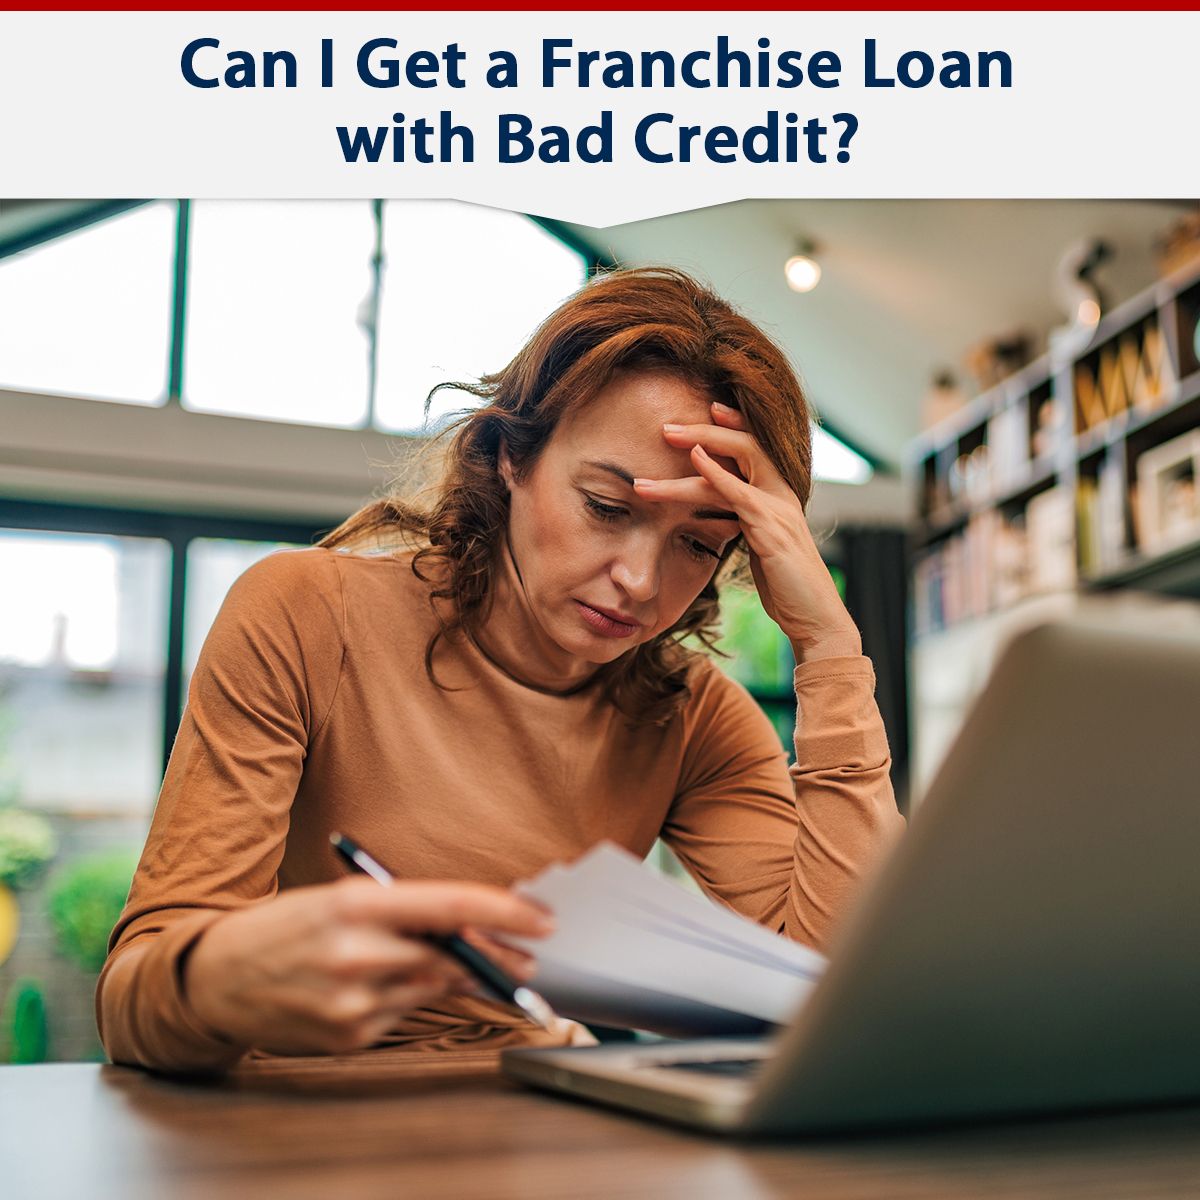 Can I Get a Franchise Loan with Bad Credit?